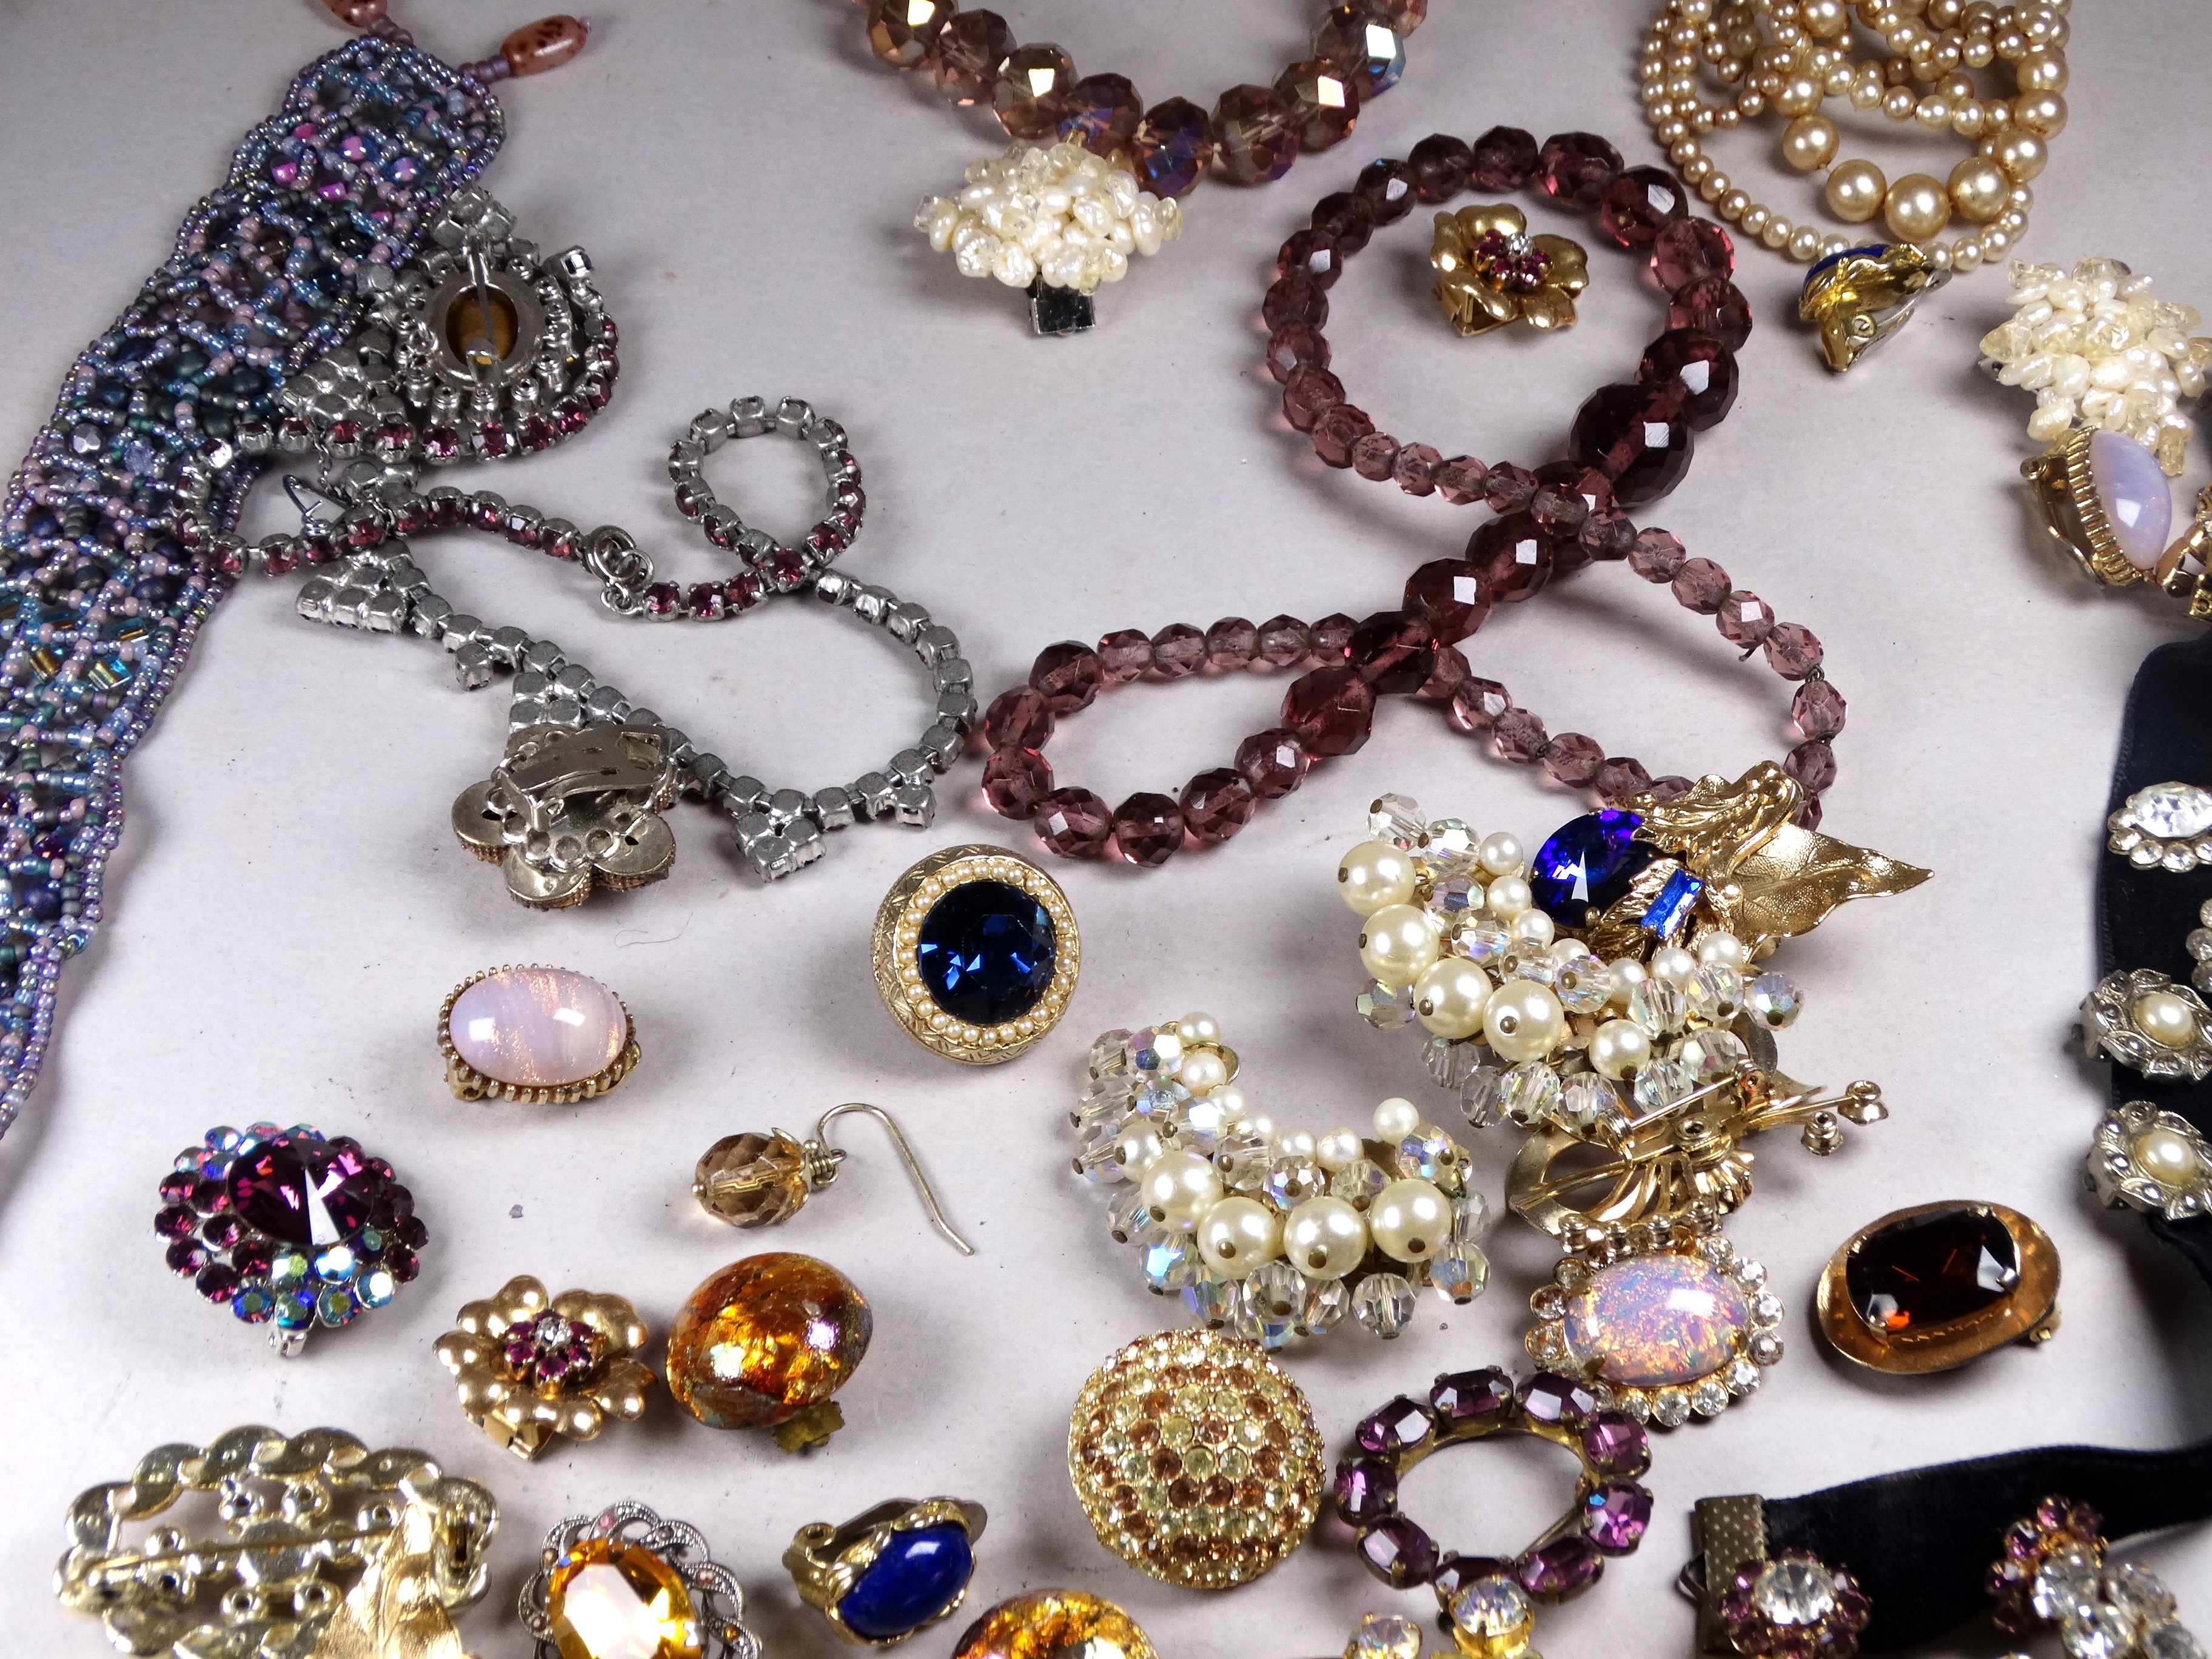 A quantity of costume jewellery - including a faux pearl collar. - Image 4 of 5